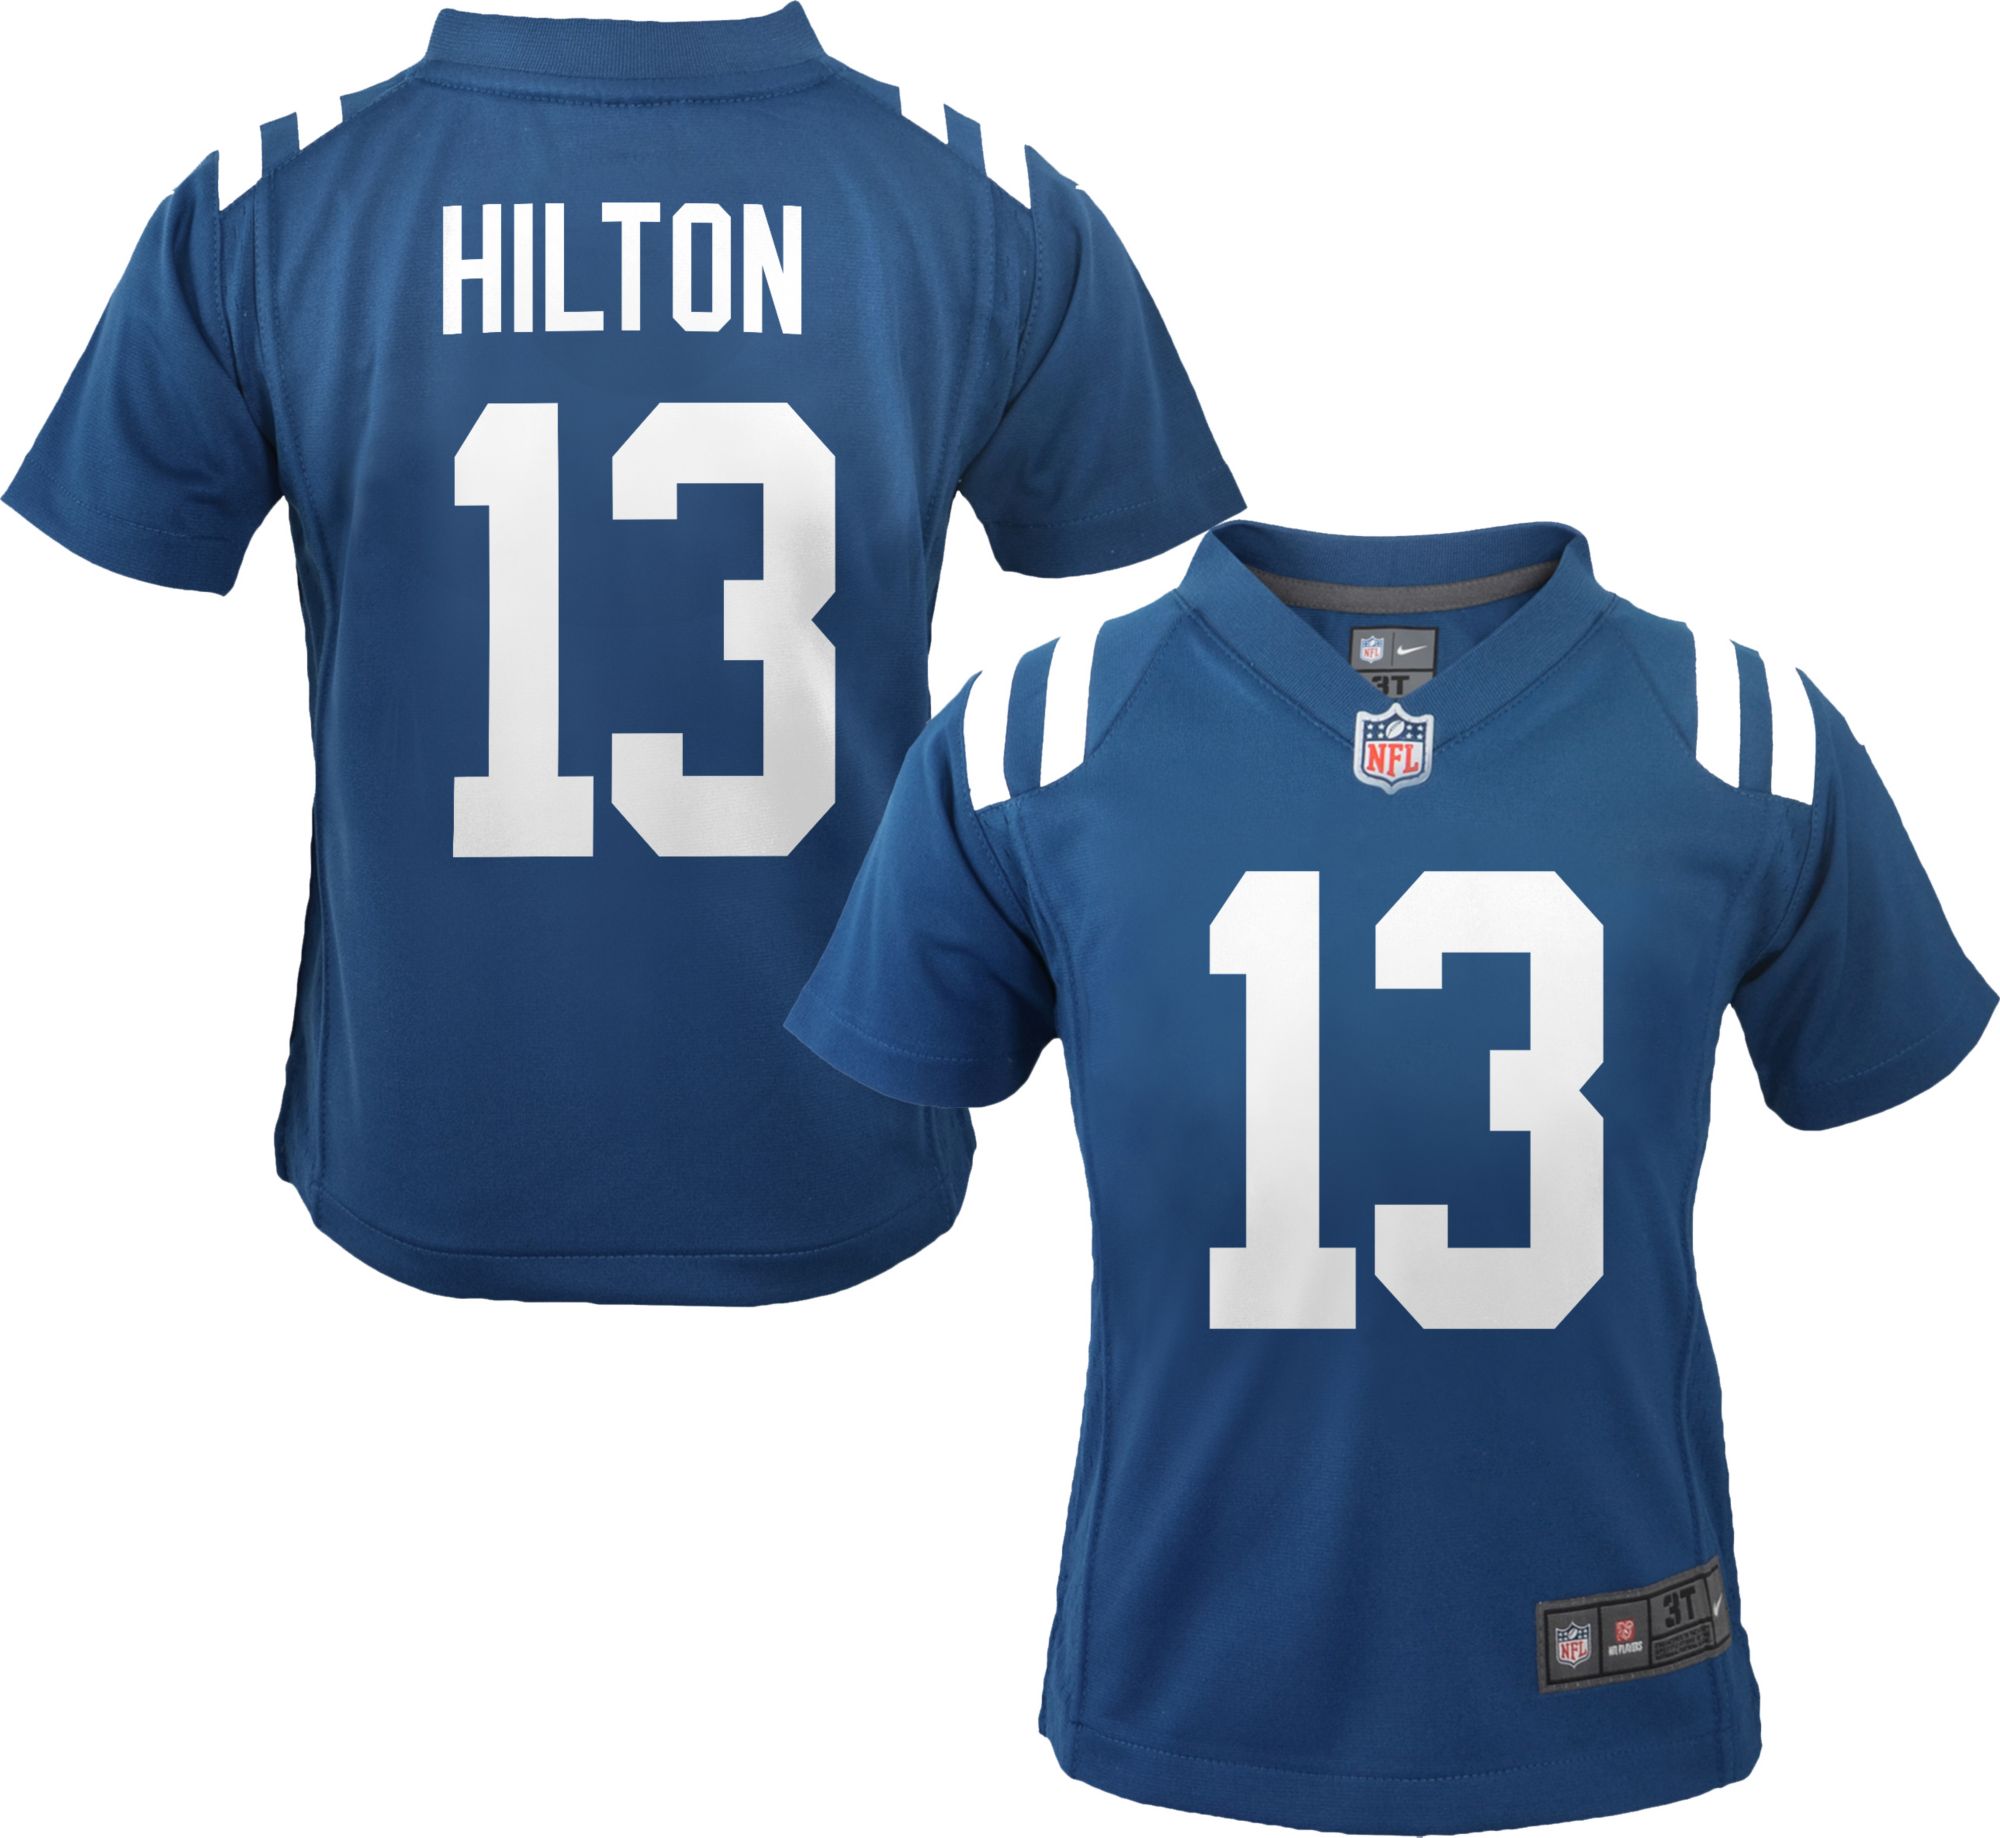 authentic indianapolis colts jersey